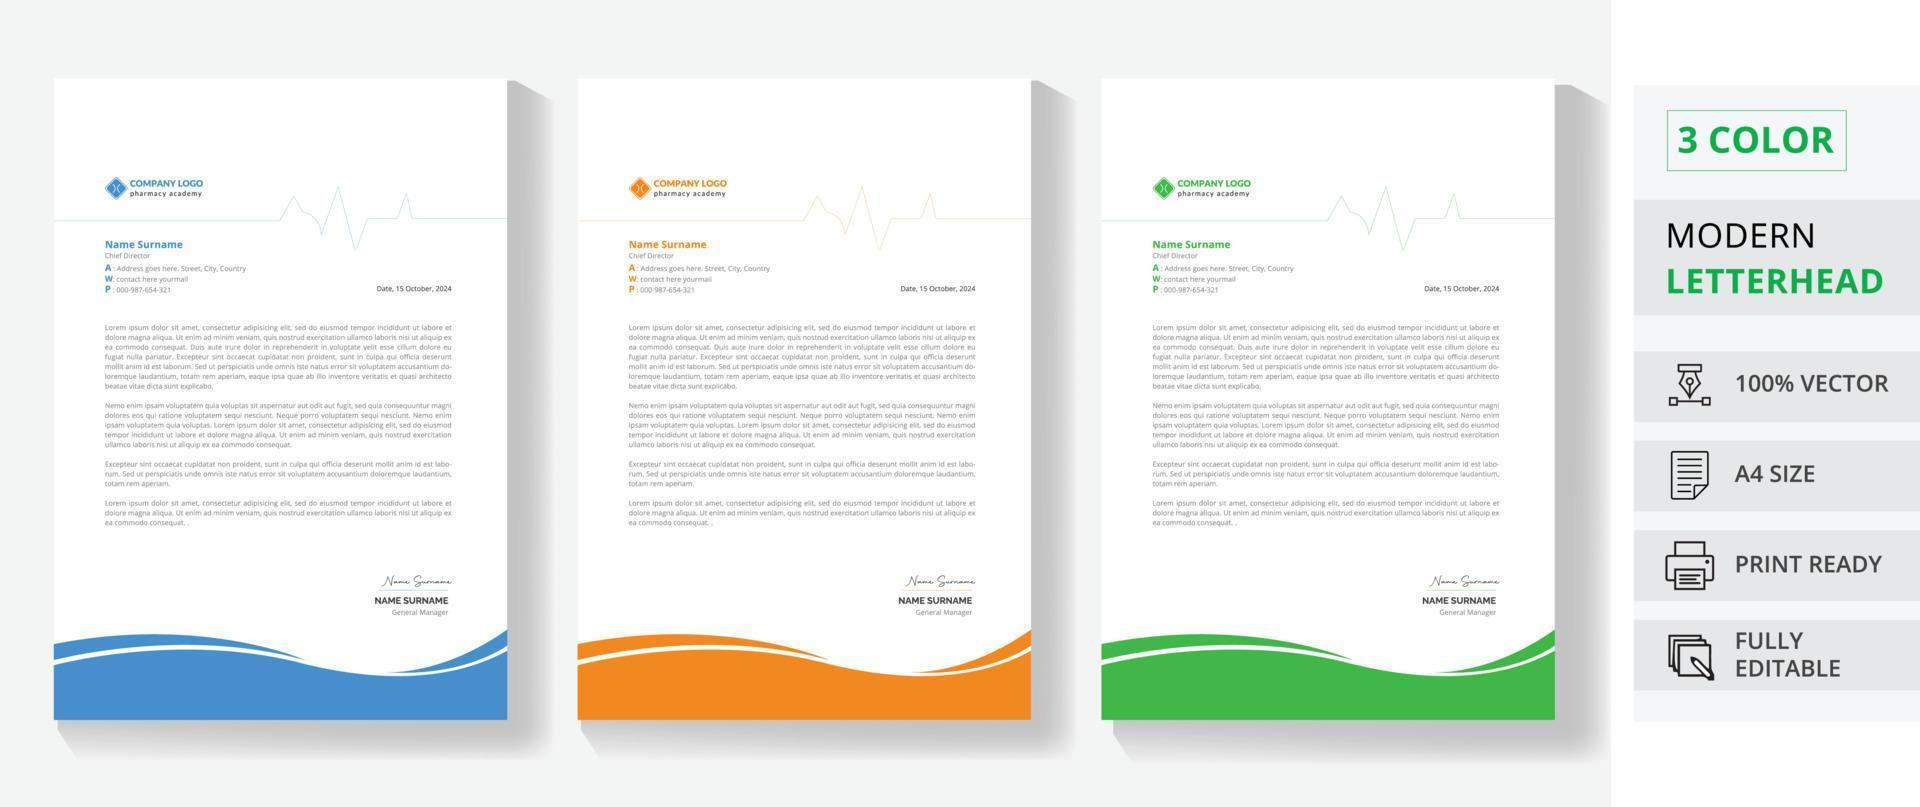 professional letterhead design with 3 color a4 size page vector